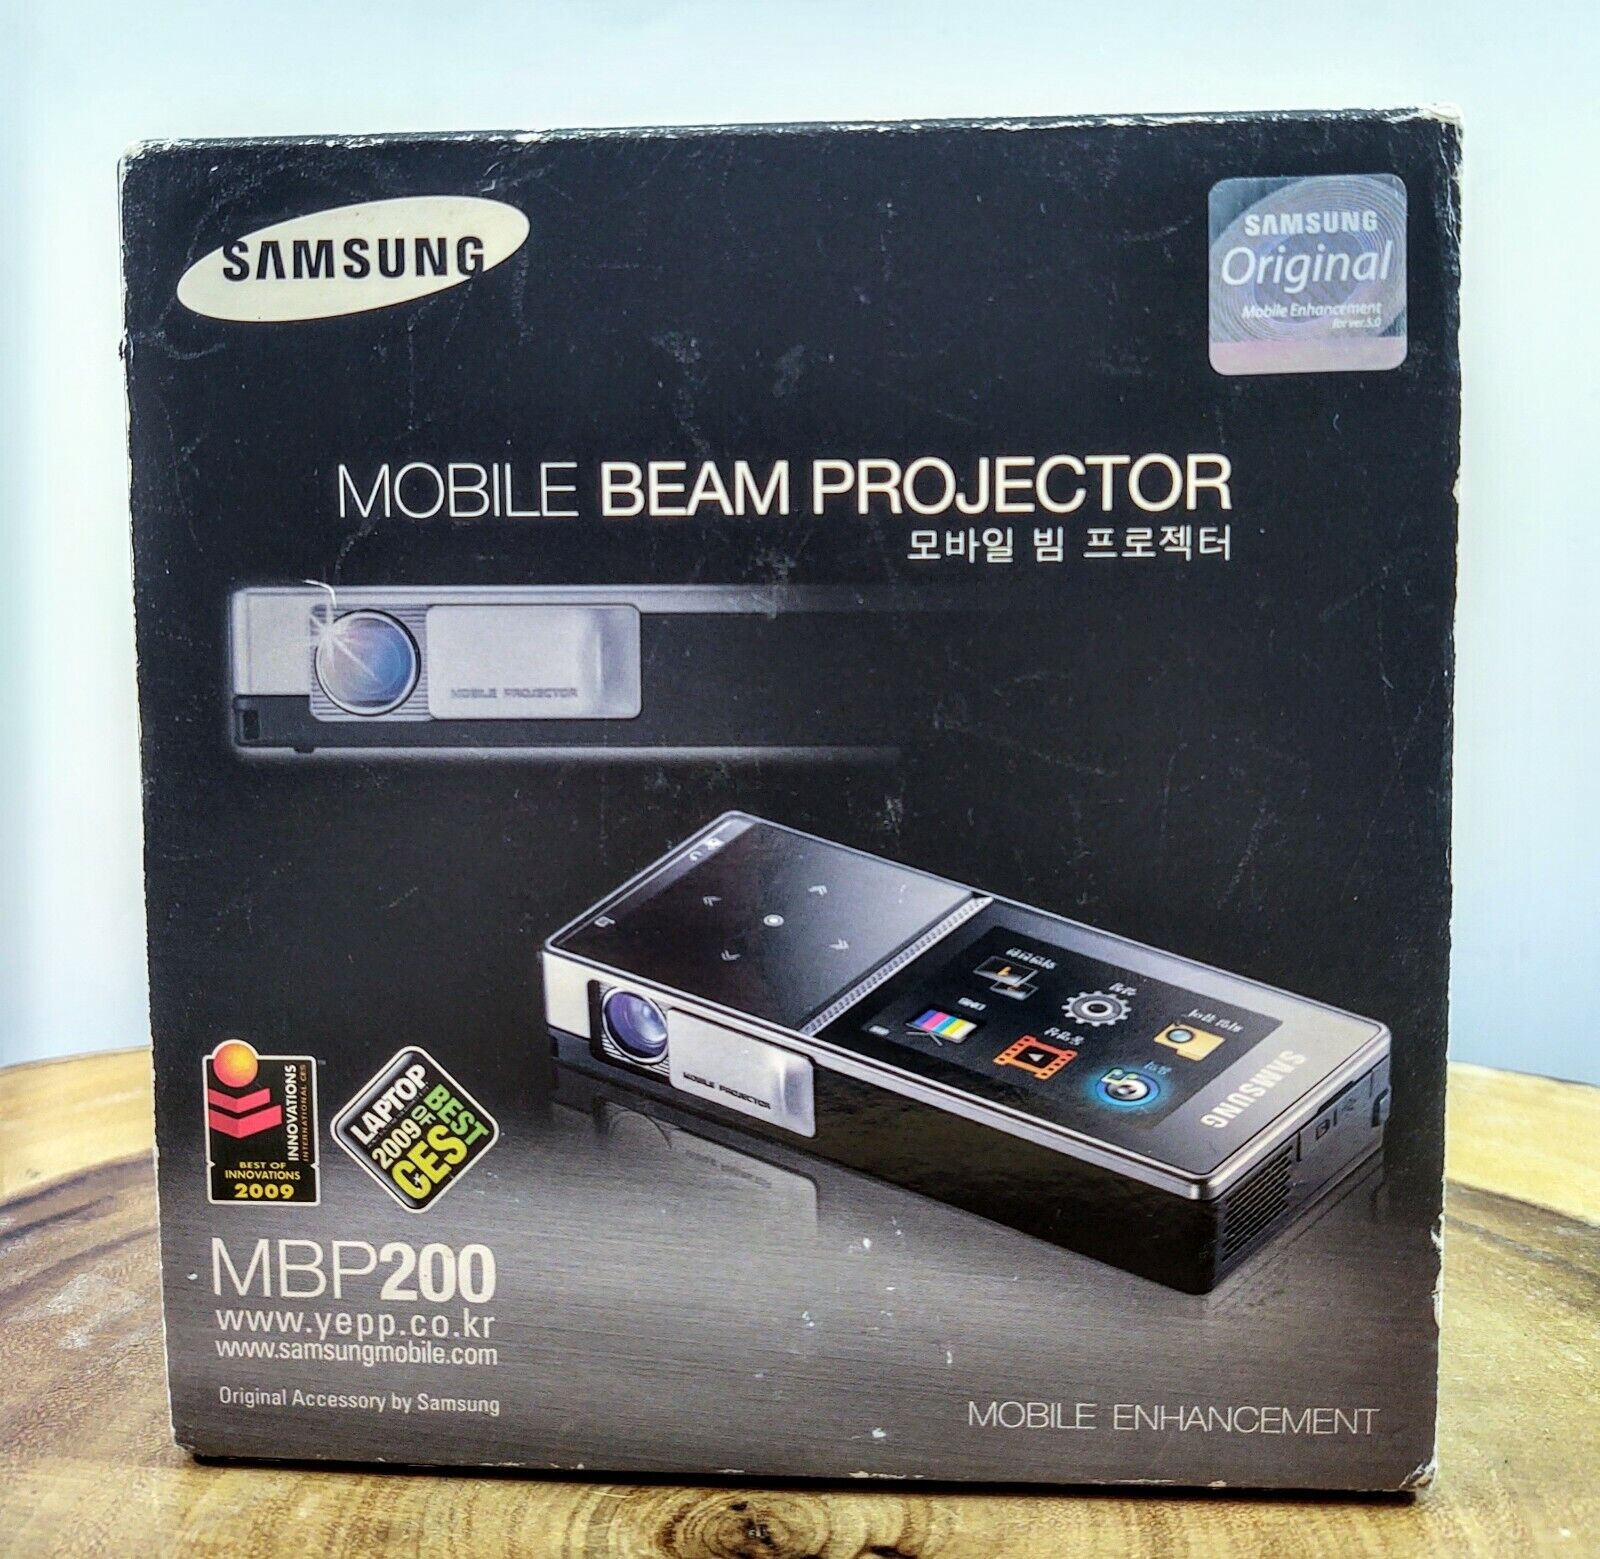 Samsung MBP200 Mobile Beam Projector- Very Rare AS-IS Please Read.